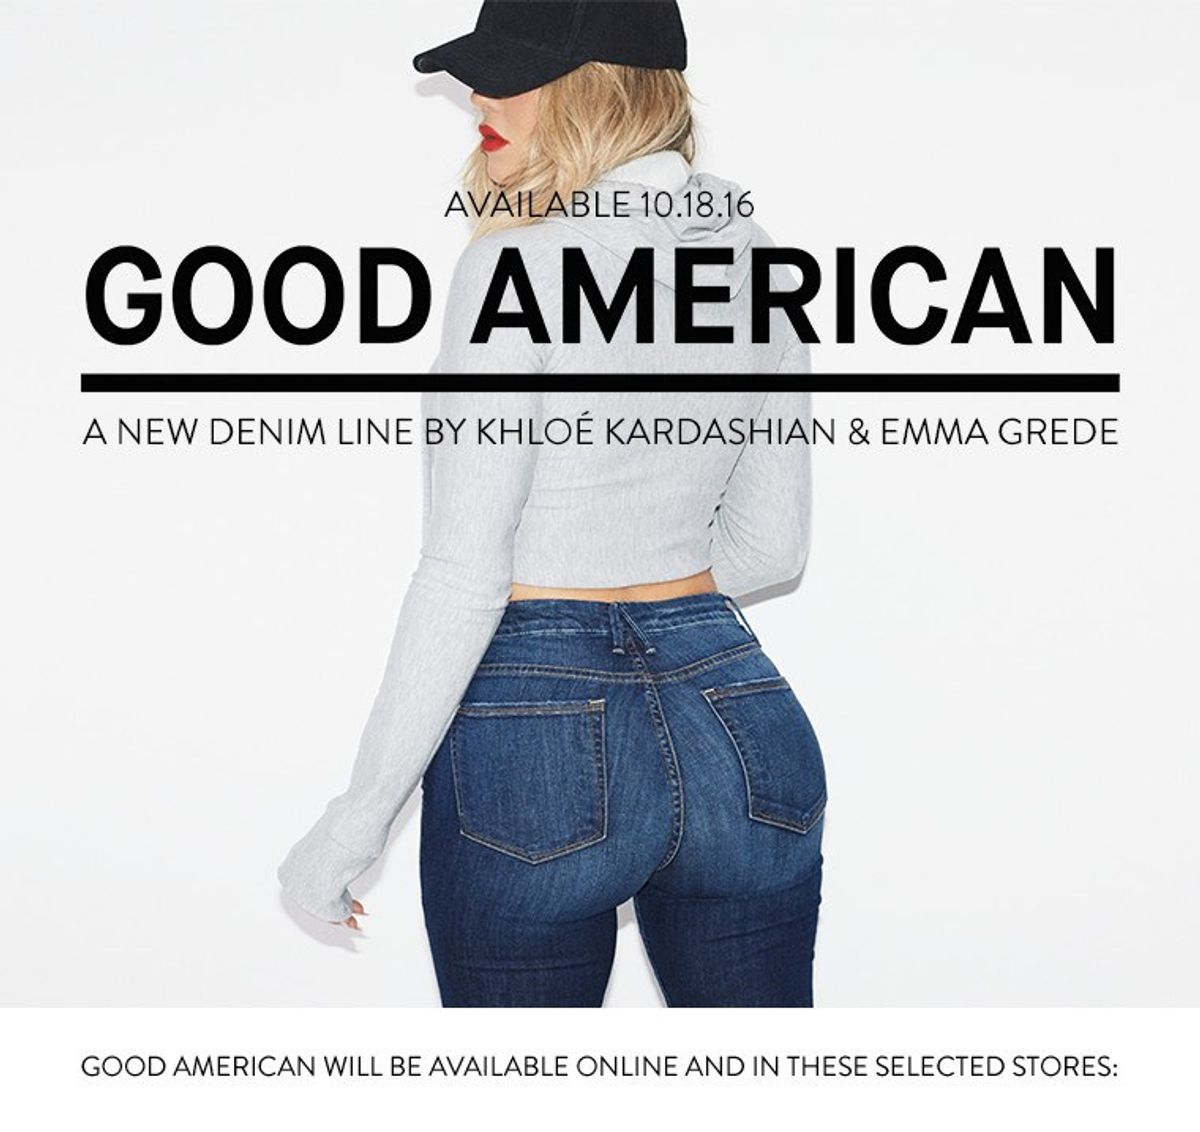 Why Khloe Kardashian's 'Good American' Is Changing The Game